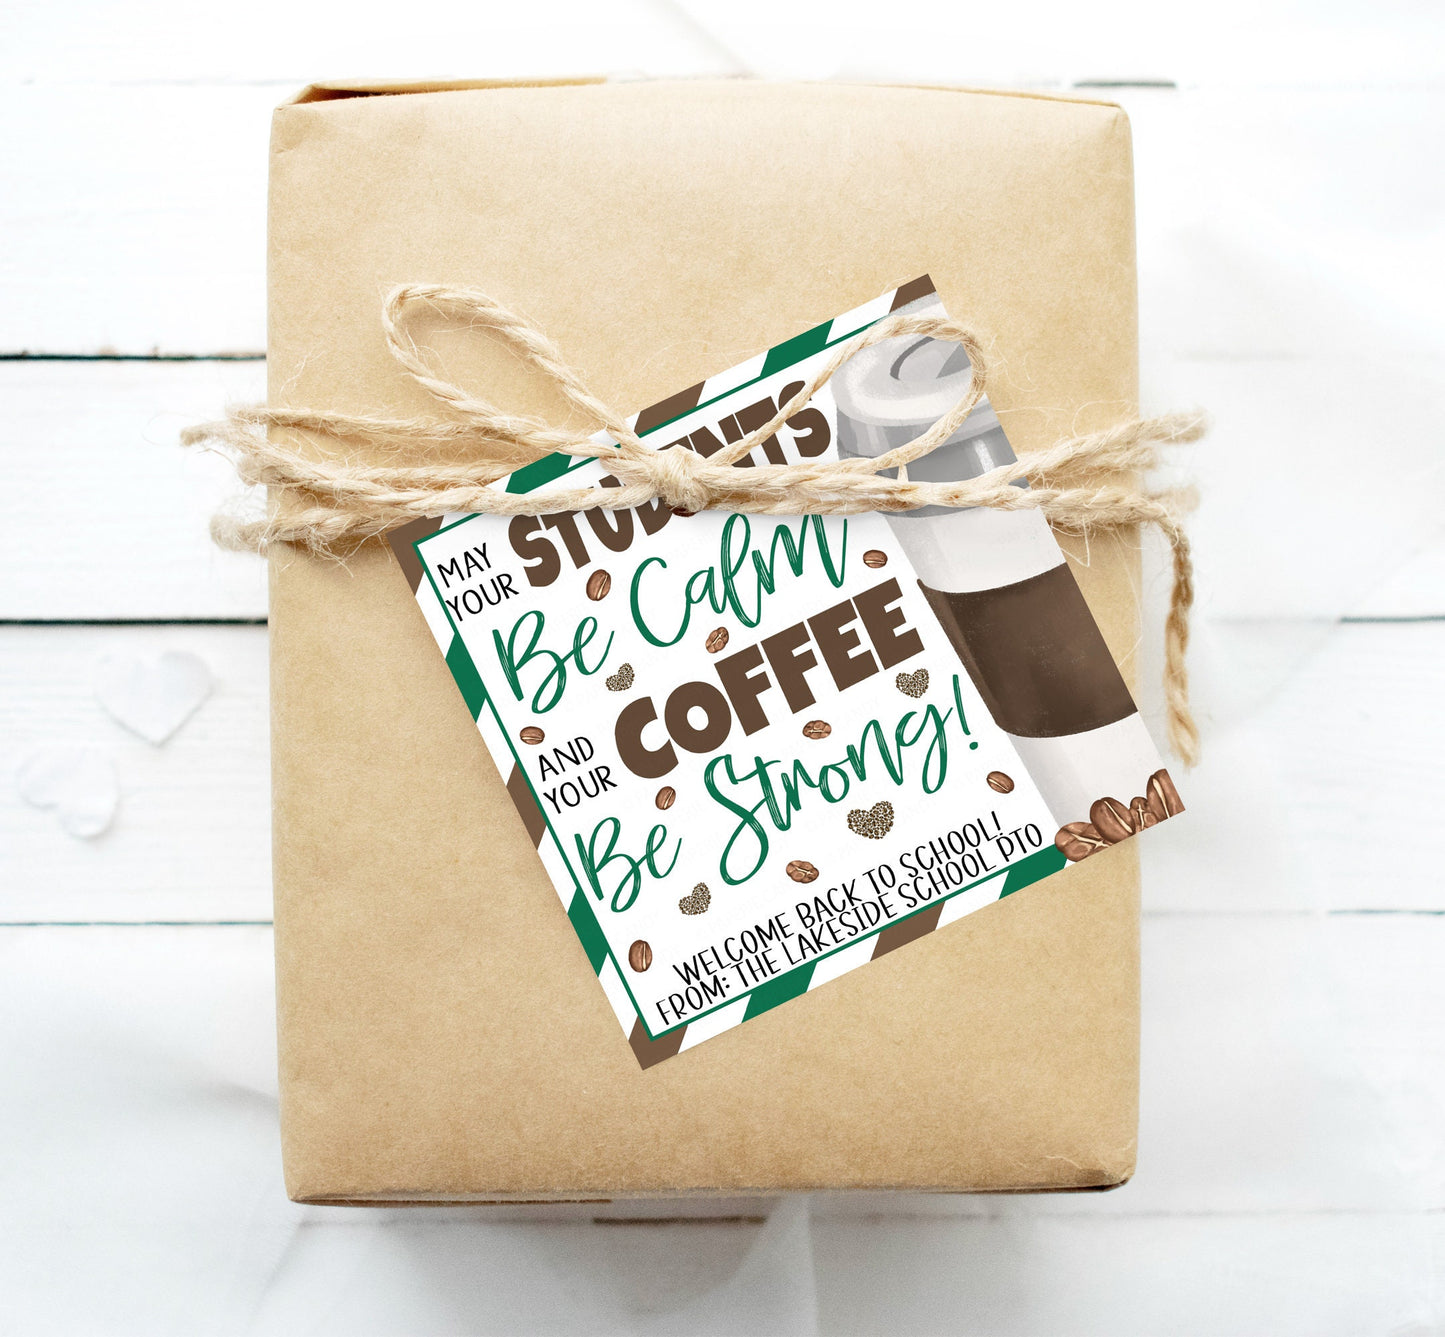 Back To School Coffee Gift Tag, Coffee Strong Students Calm, First Day Teachers Staff New School Year, PTO PTA, Printable Editable Template